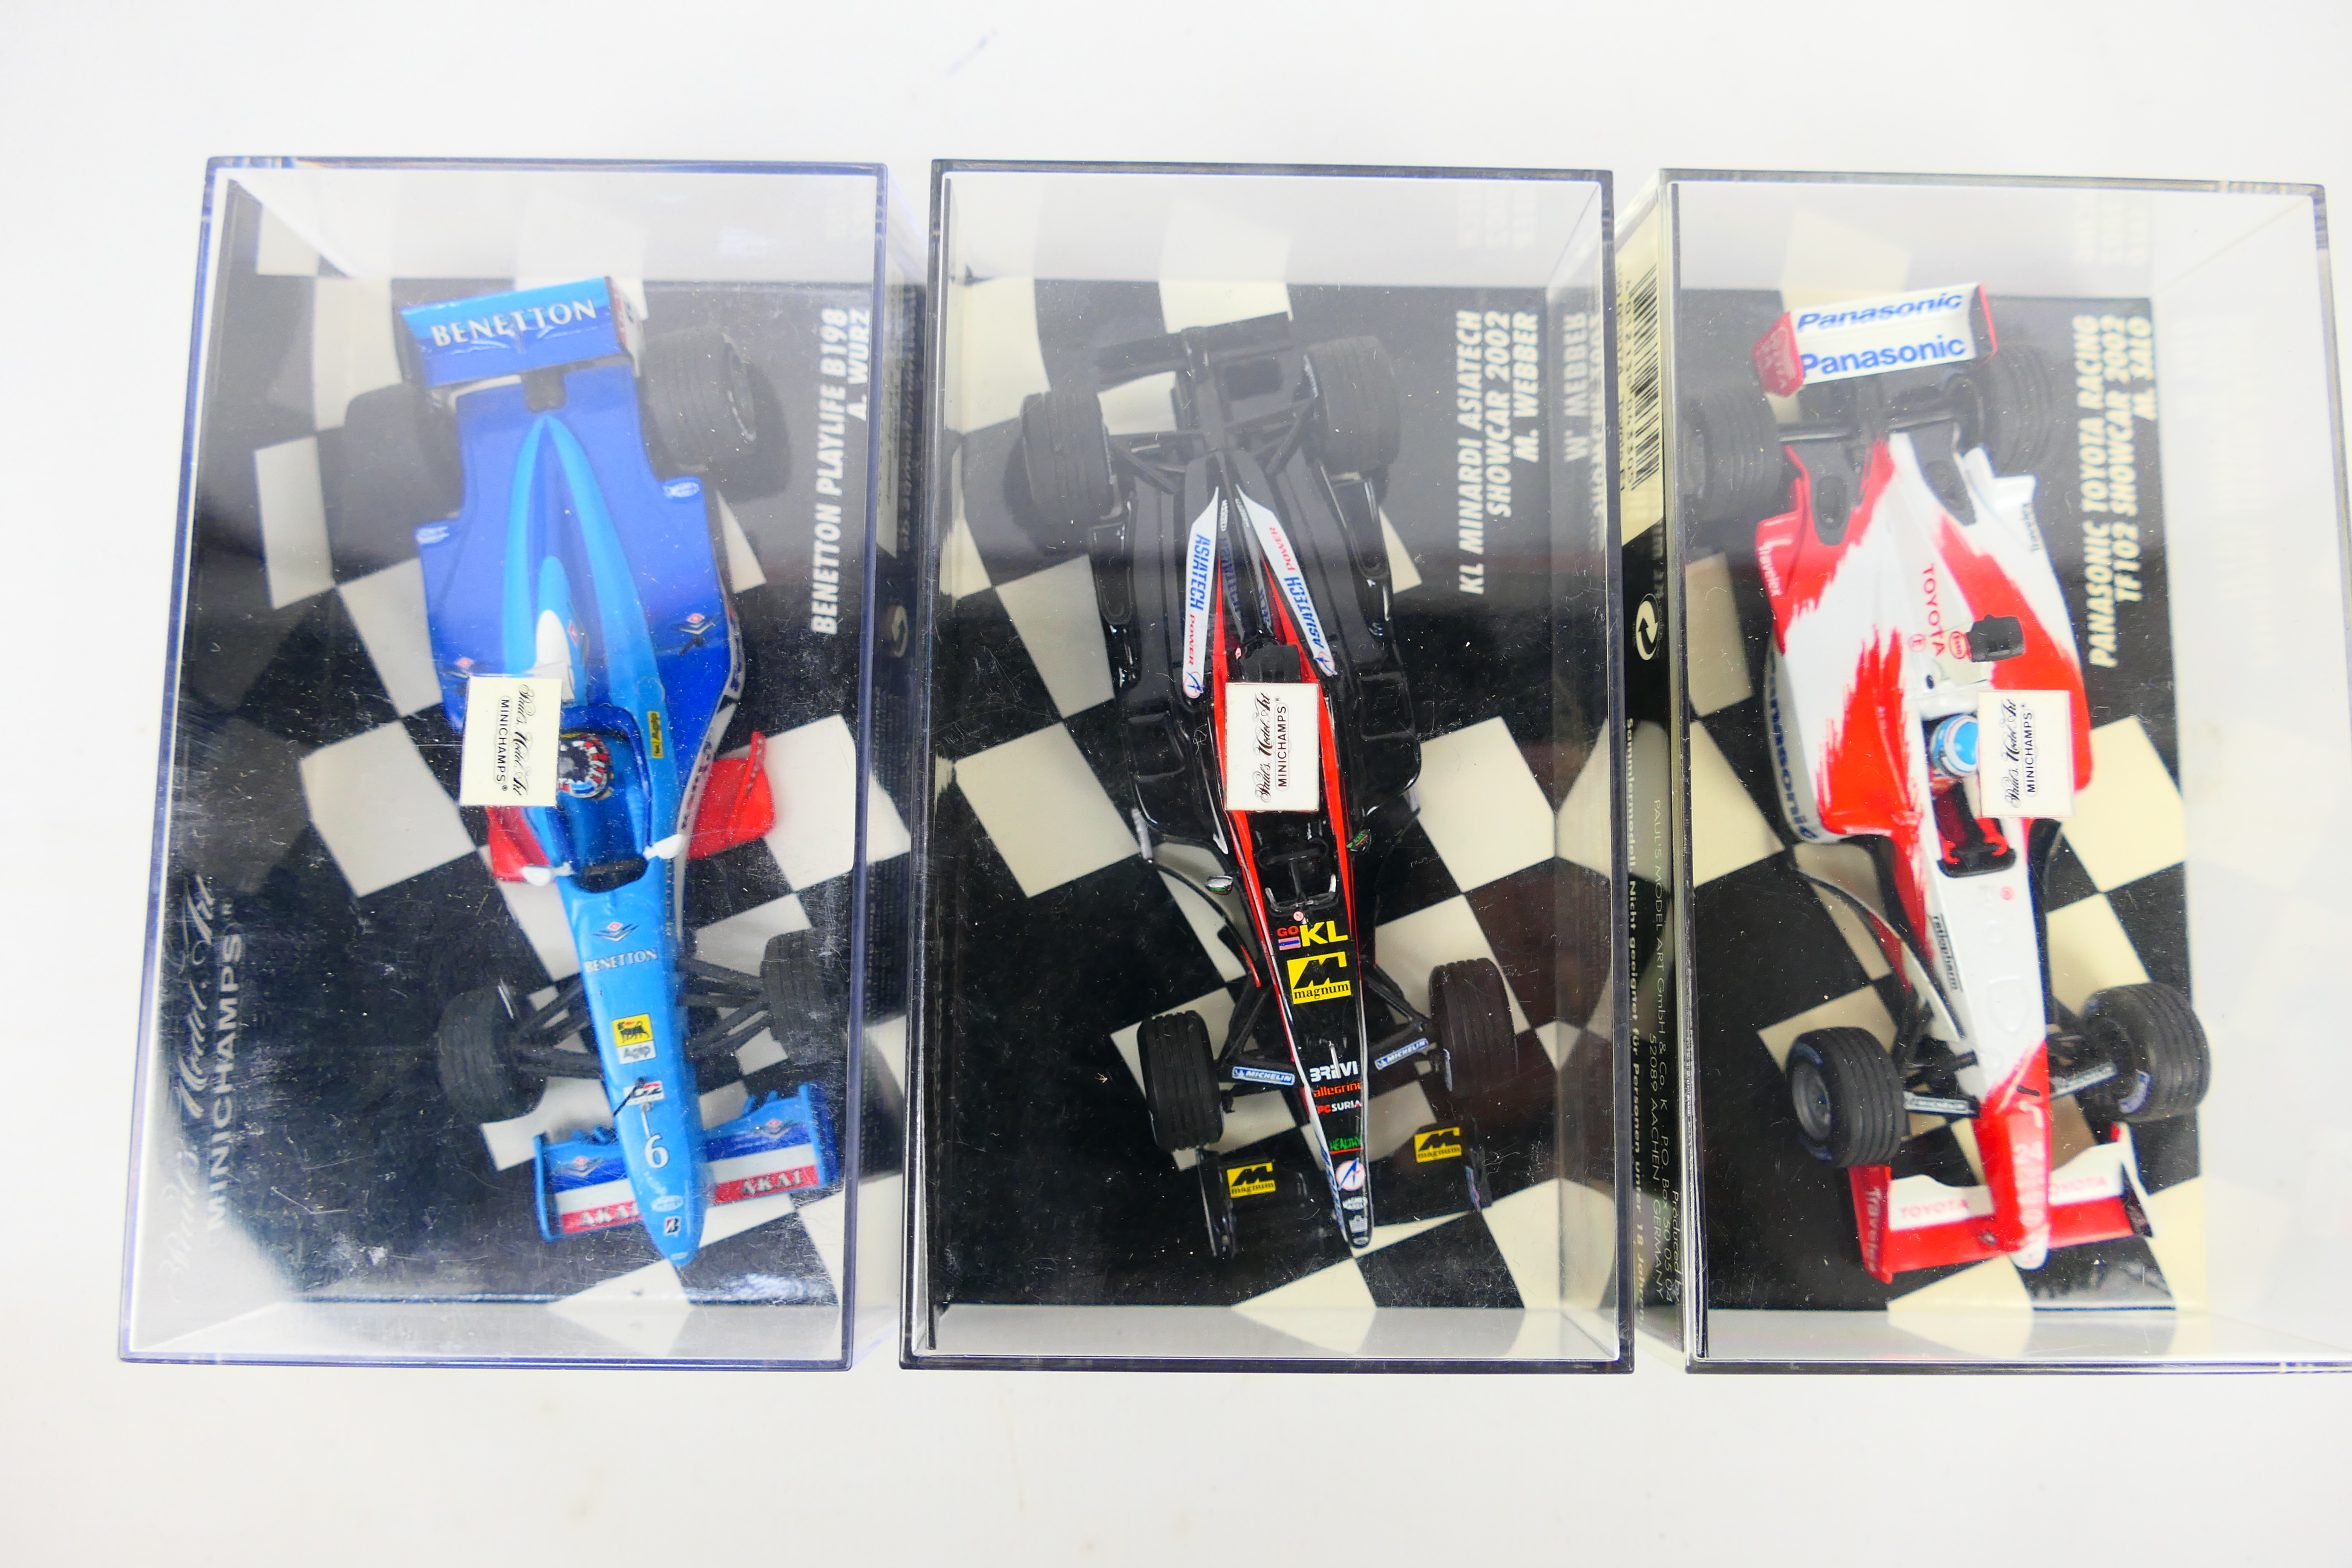 Minichamps - Seven boxed 1:43 scale diecast F1 racing cars from Minichamps. - Image 7 of 8